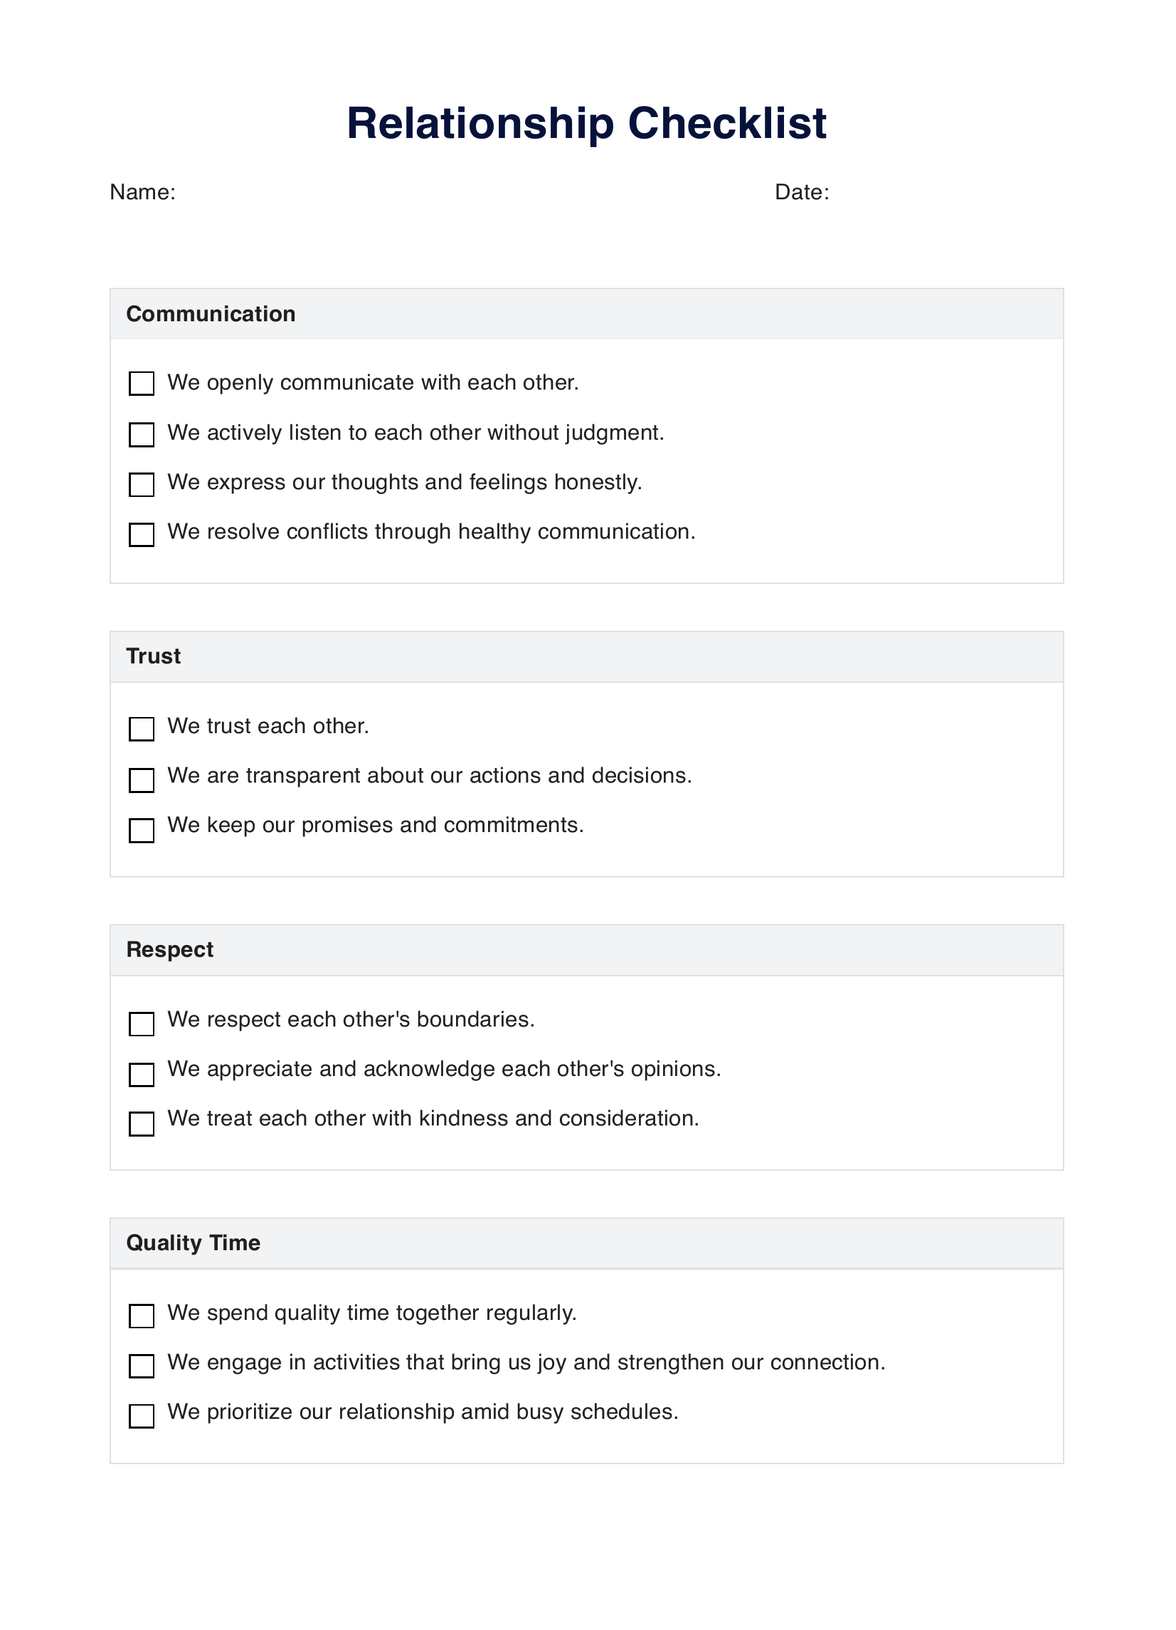 Relationship Checklist Template PDF Example